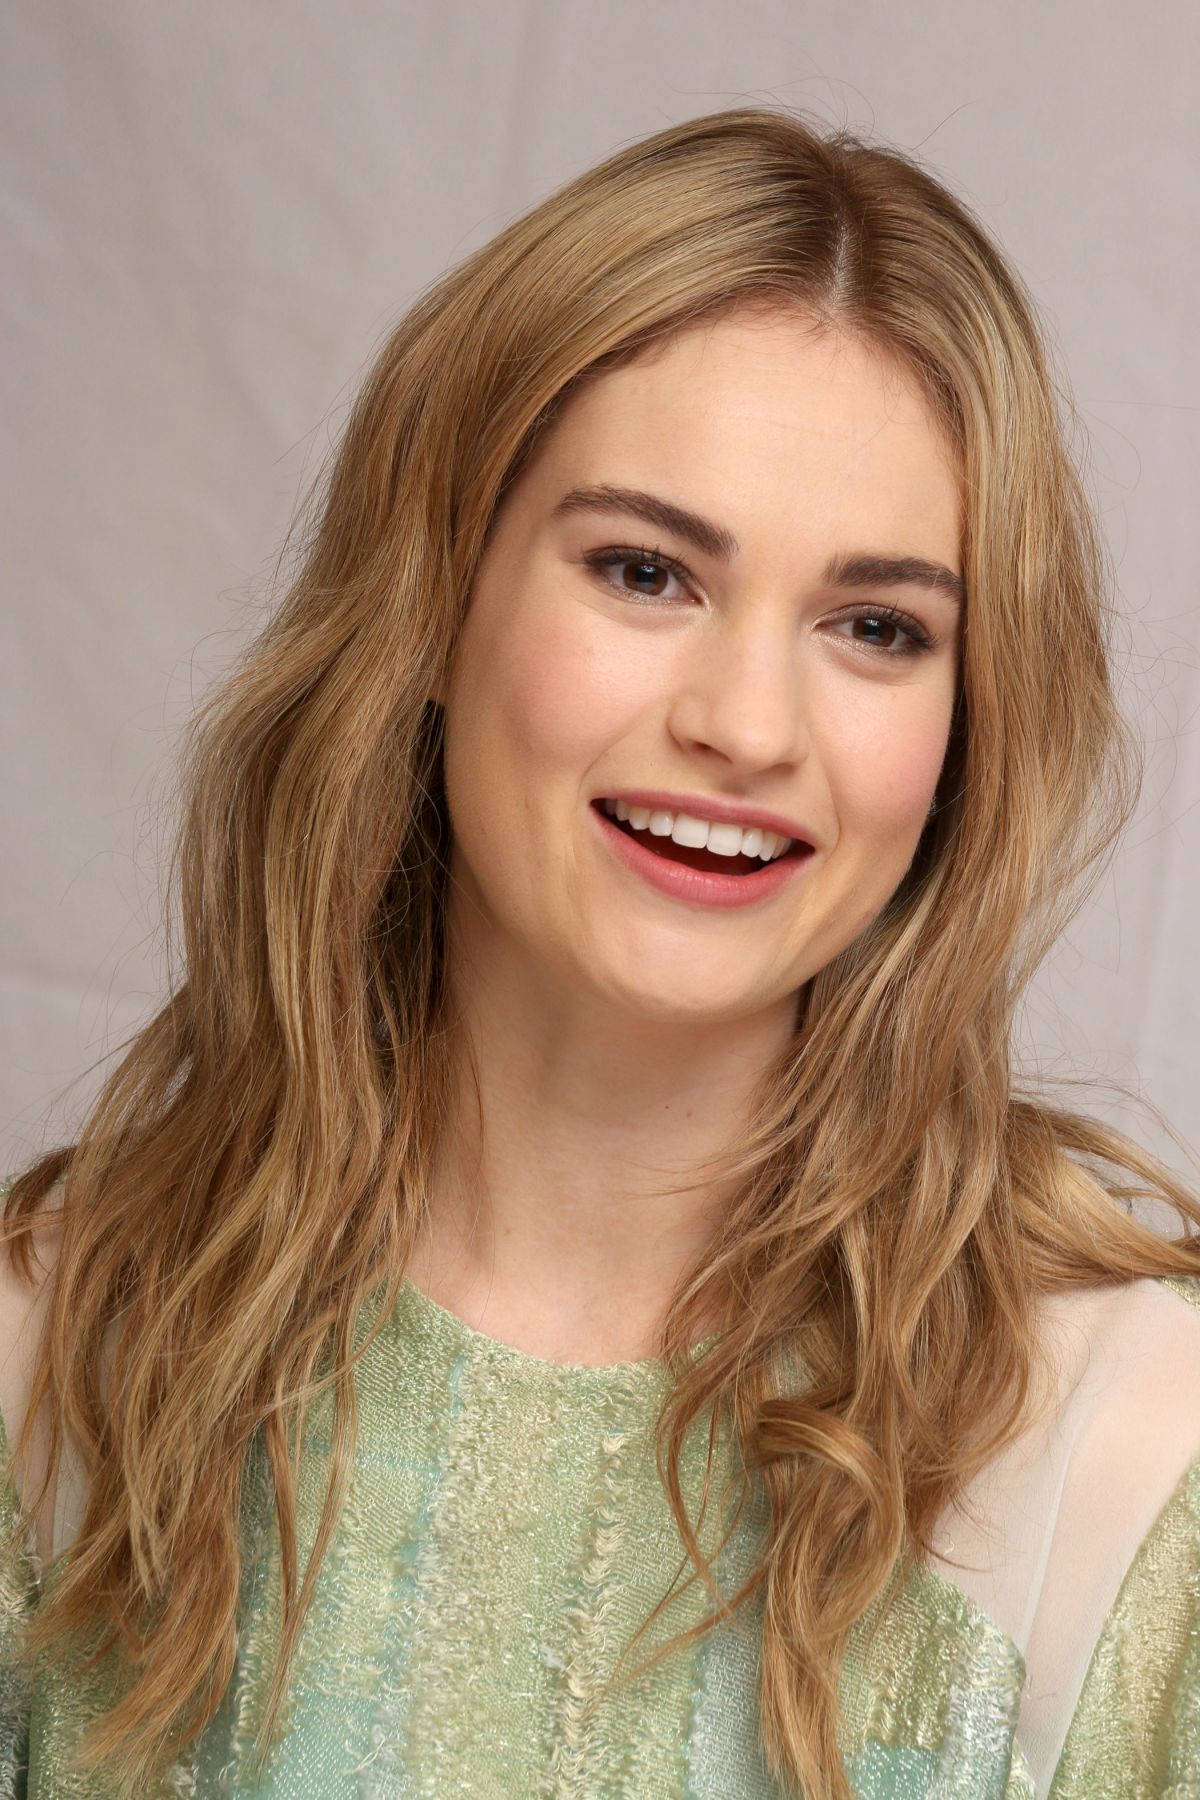 Lily James #131008 Wallpapers High Quality | Download Free